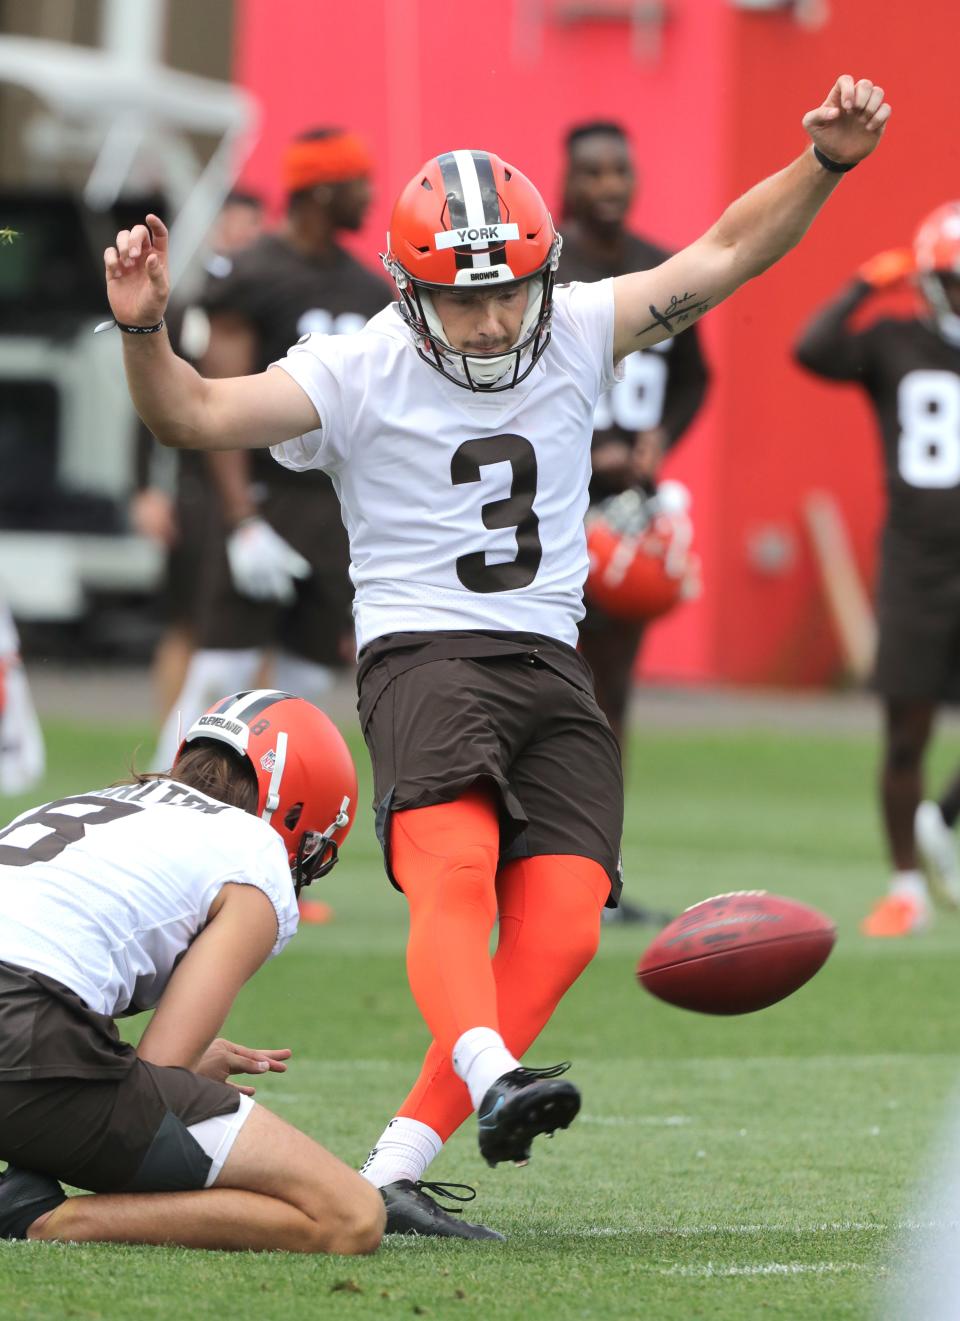 Cleveland Browns rookie kicker Cade York kicks a field goal during OTA workouts on Wednesday, June 8, 2022 in Berea.